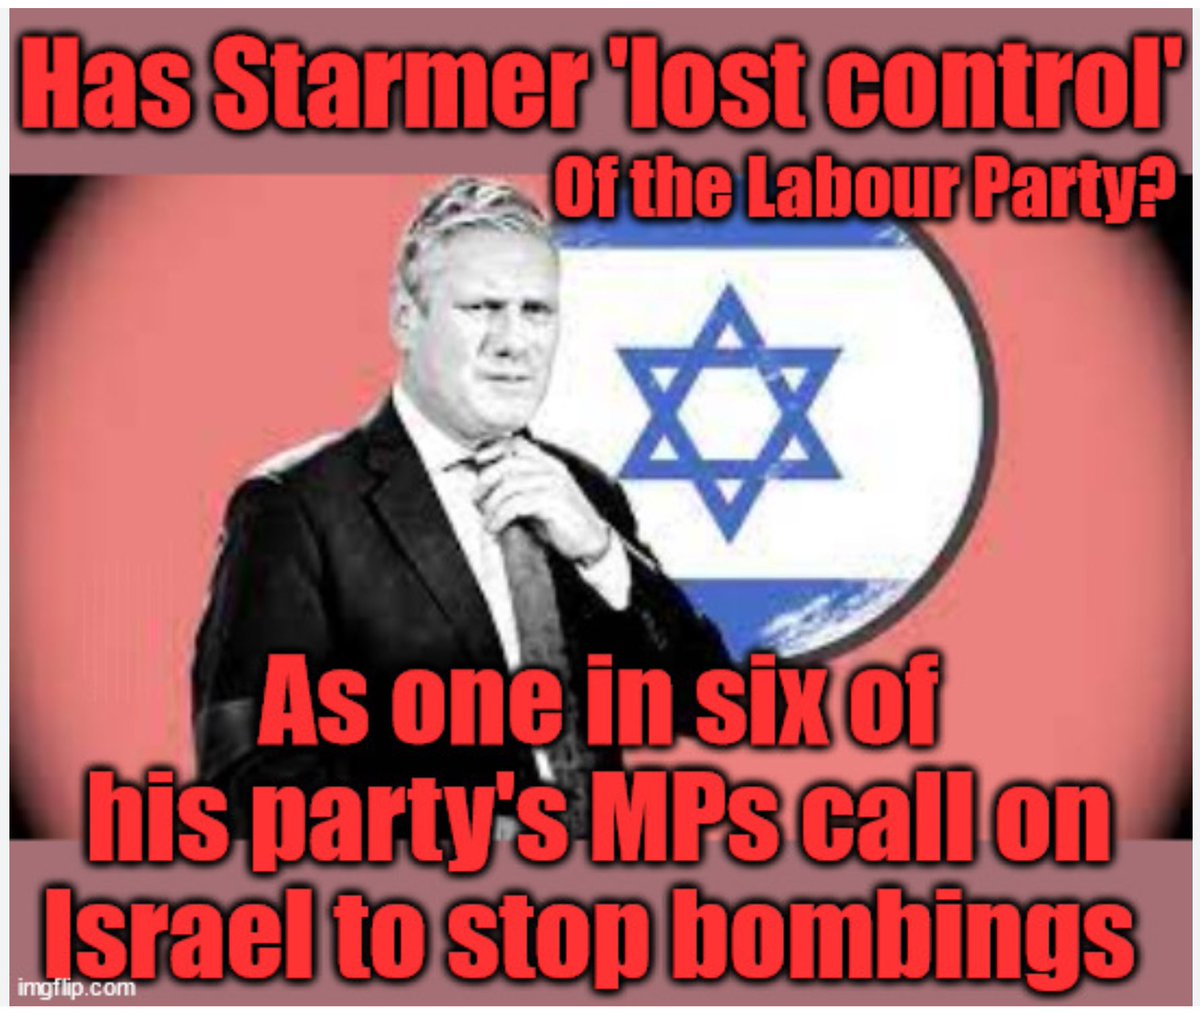 UK democracy is dead isn’t it? McVey ludicrously claims that Sunak inherited economic woes from Labour. While COVID corruption (& more) show Tories say/do anything for cash. #BREATHTAKING And @Keir_Starmer’s endless U-Turns & #Israeli lobby money show he’s a bought man #ceasefire